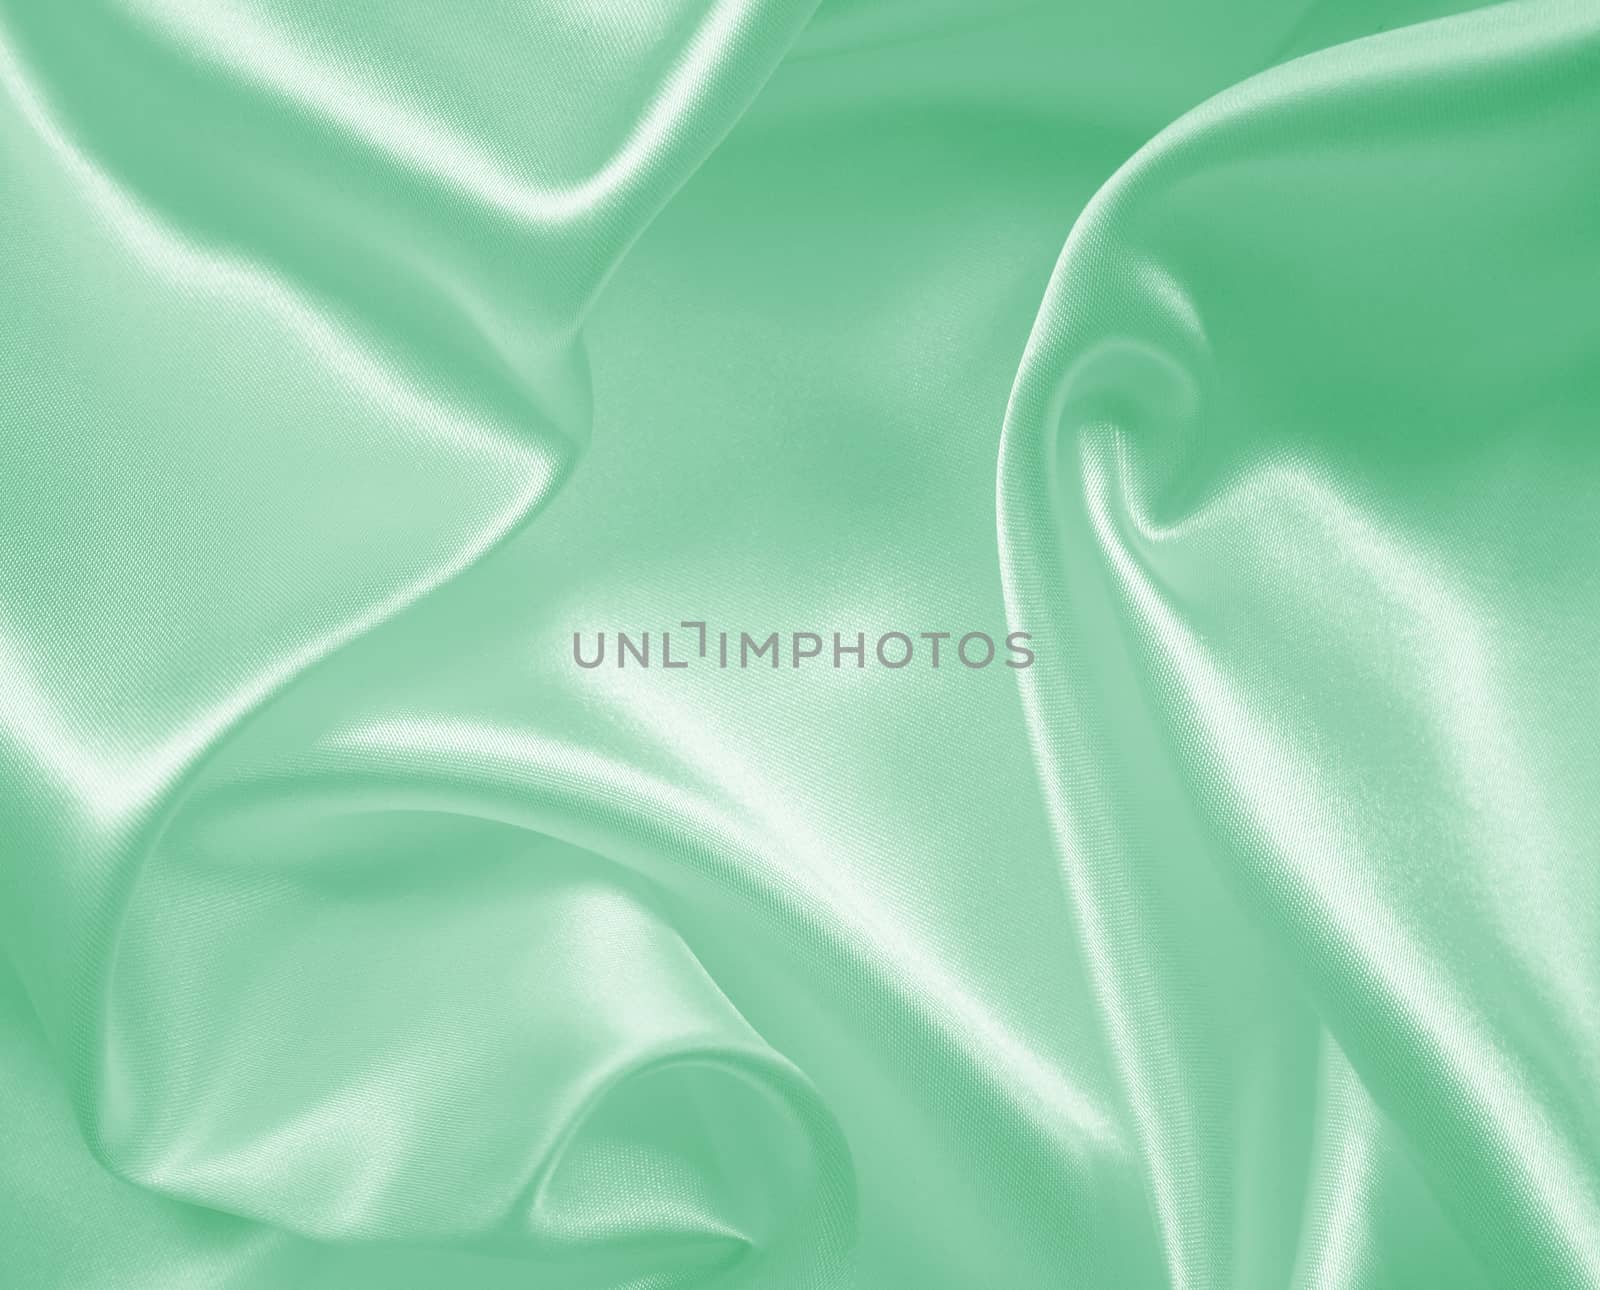 Smooth elegant green silk or satin texture as background  by oxanatravel